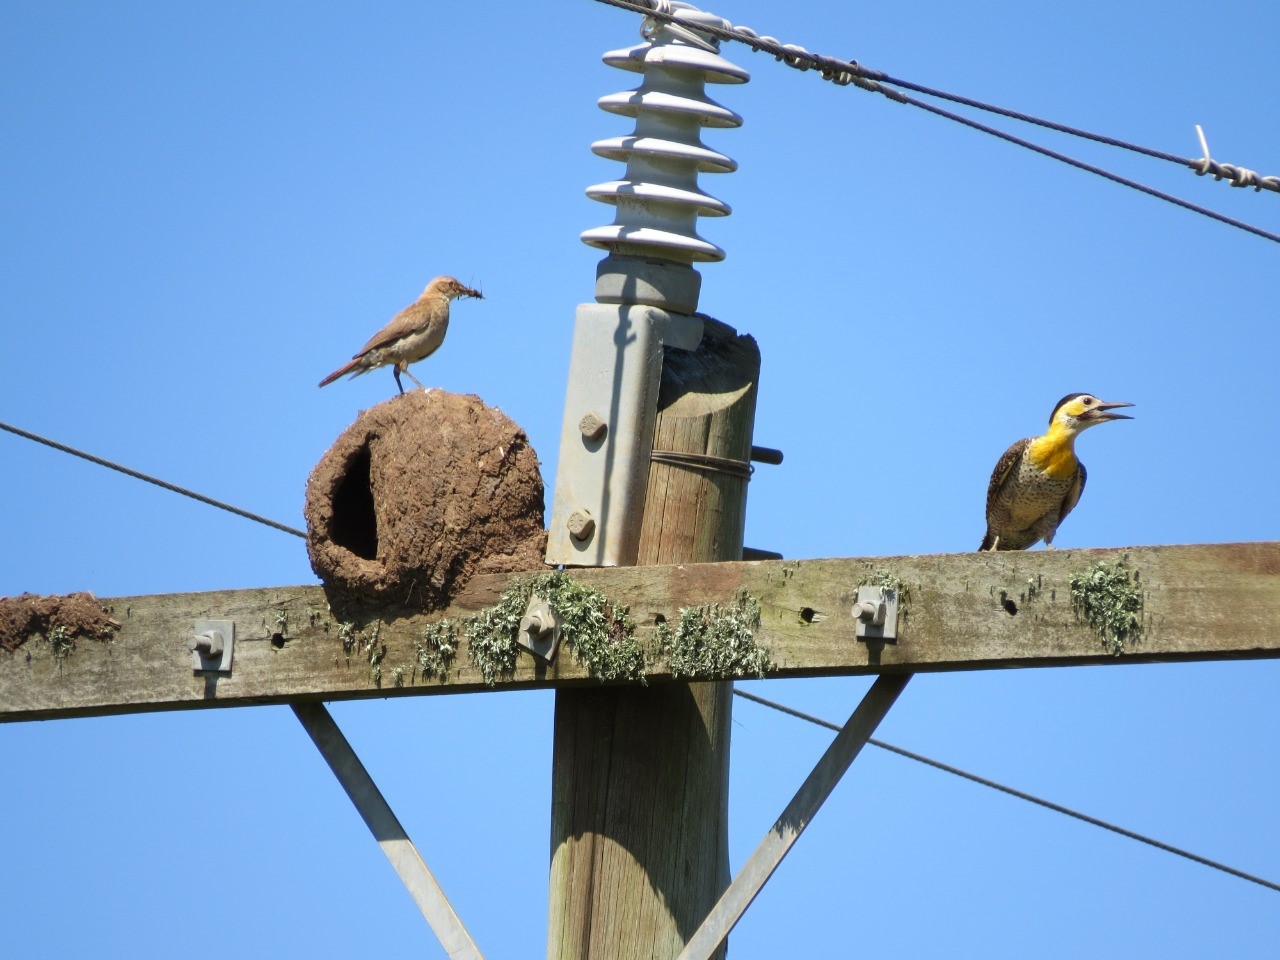 Environmental Impacts of Transmission Lines on Avifauna